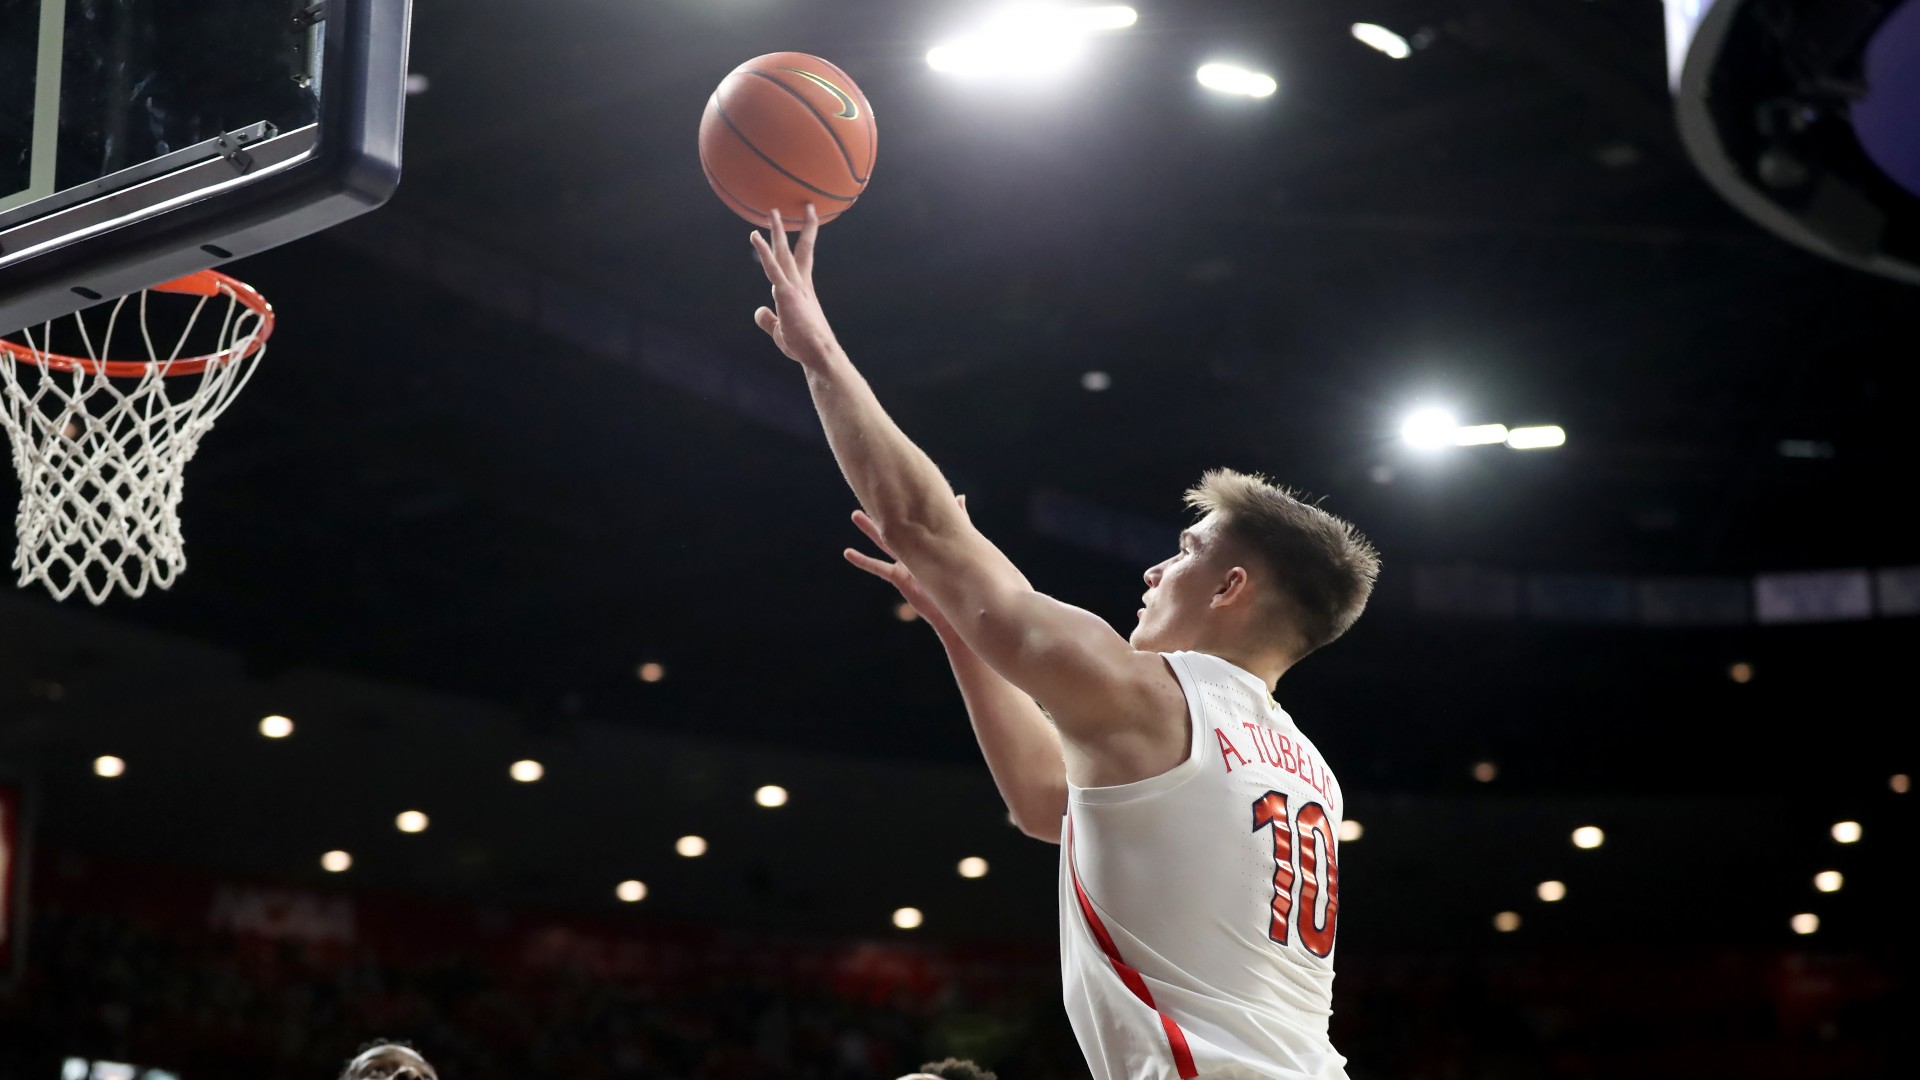 Arizona vs. Stanford College Basketball Odds, Picks, Predictions: Why the Value Lies on O/U (Thursday, Jan. 20) article feature image